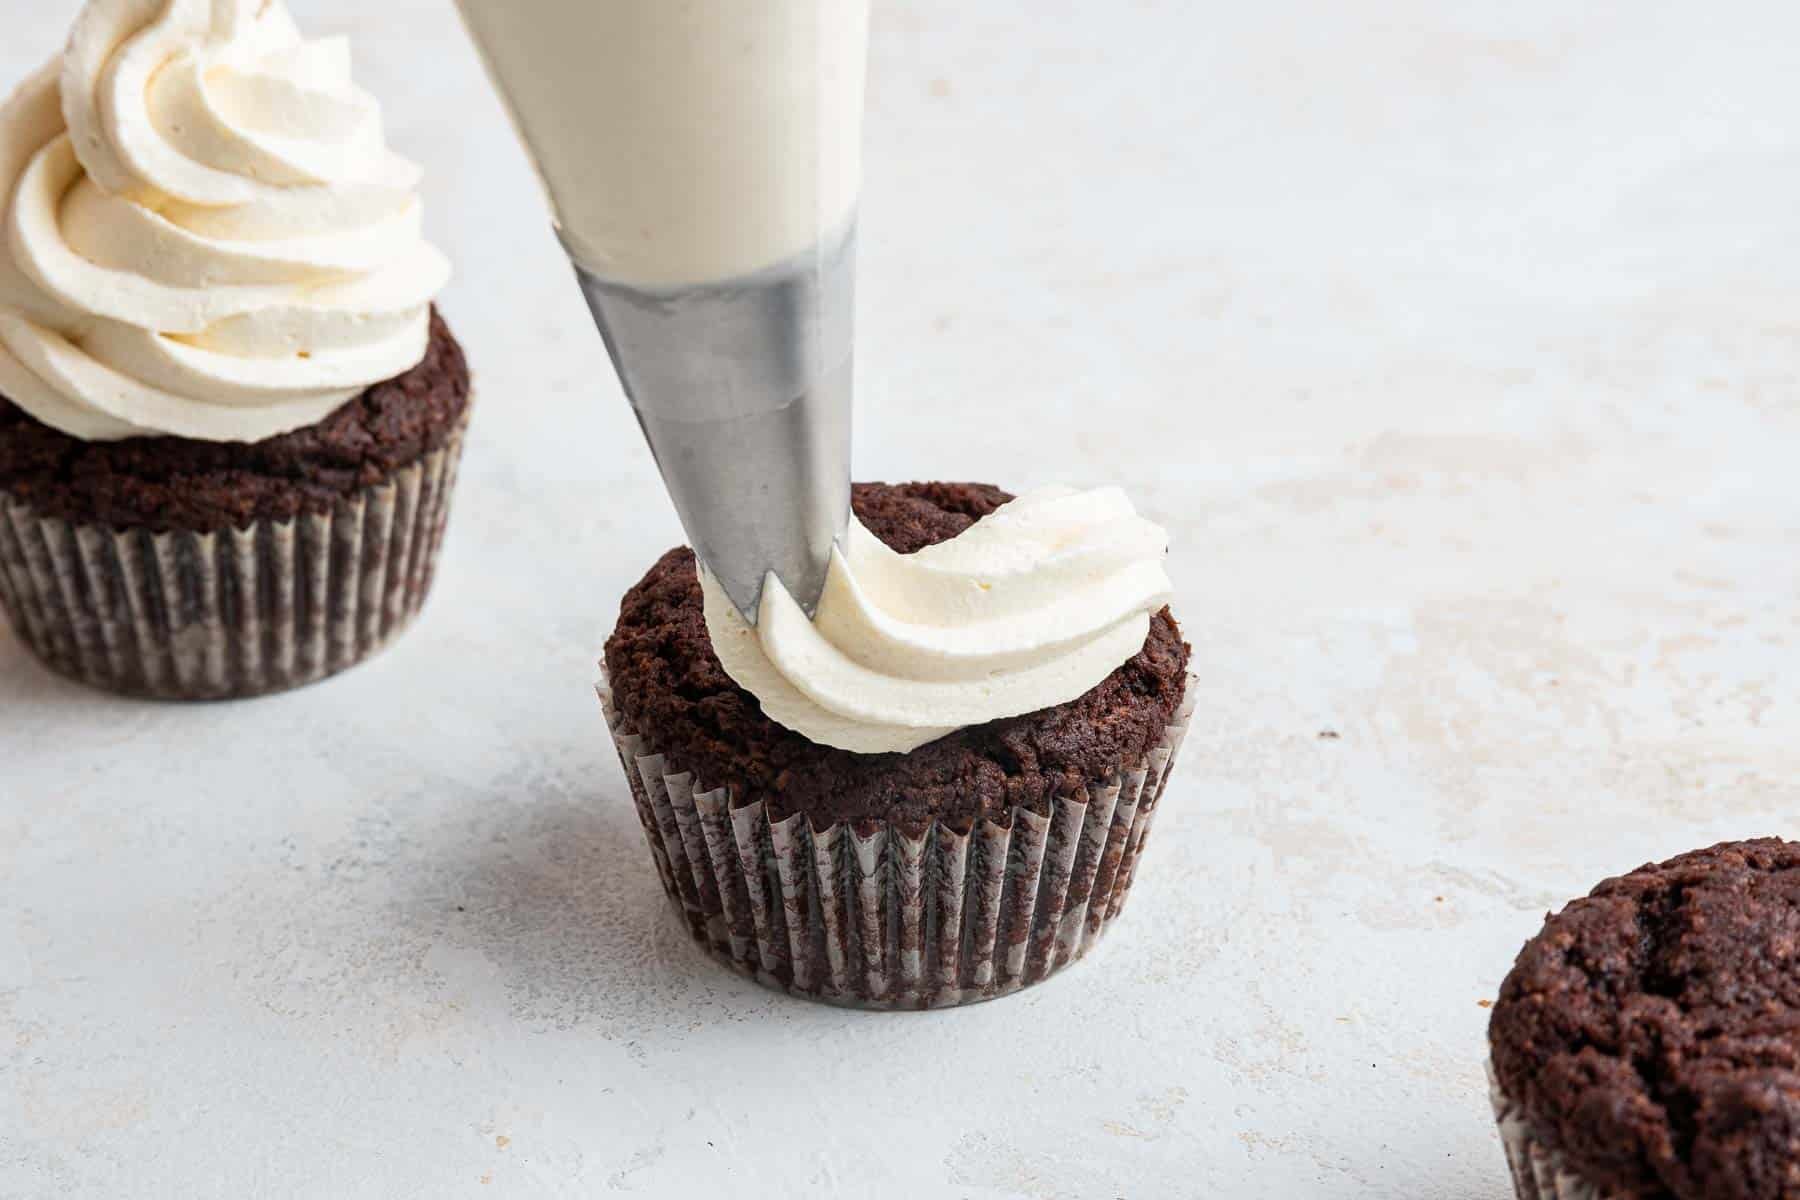 Piping bag putting icing on chocolate cupcake from above.